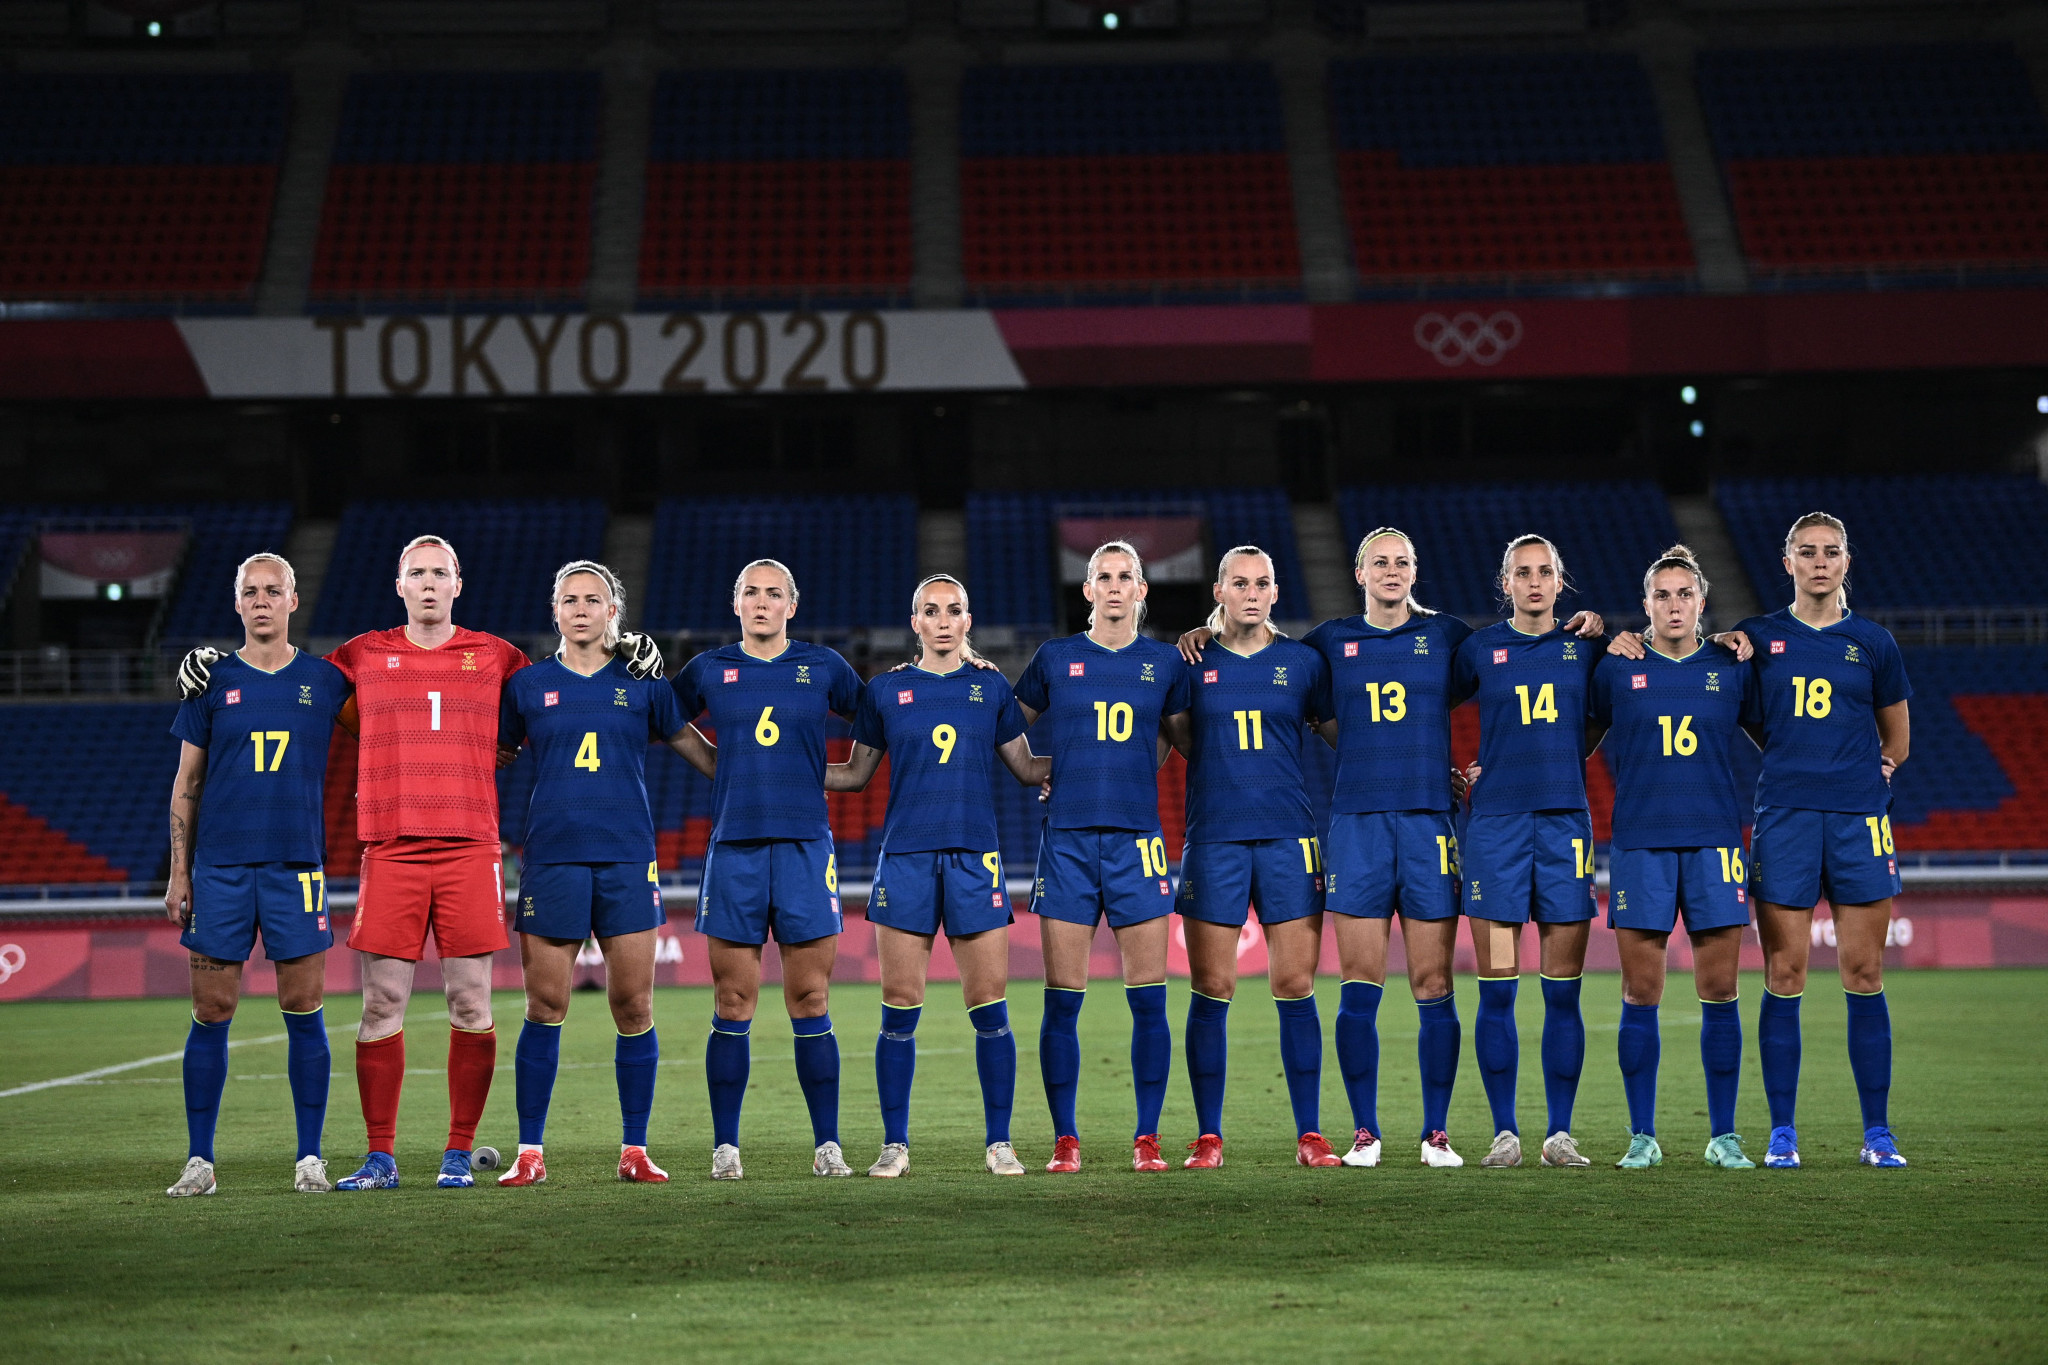 Sweden beat Australia to reach the women's football final at Tokyo 2020 ©Getty Images